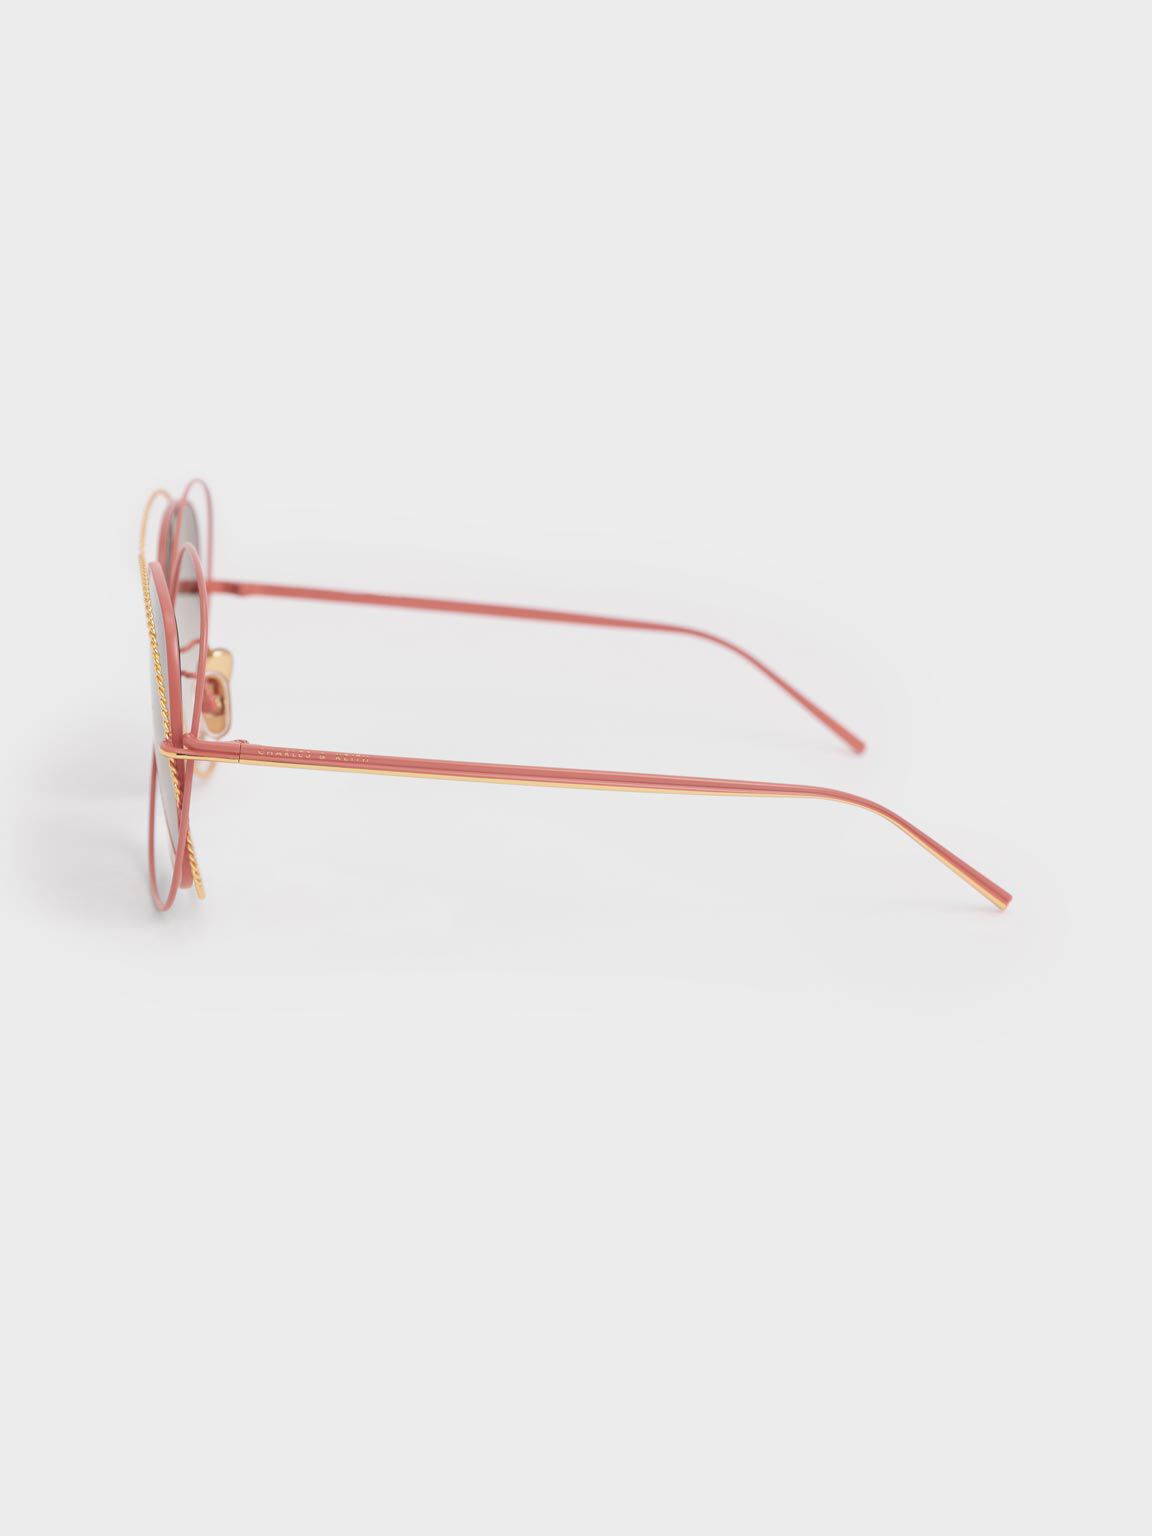 Cut-Out Frame Metallic-Rimmed Butterfly Sunglasses, Pink, hi-res